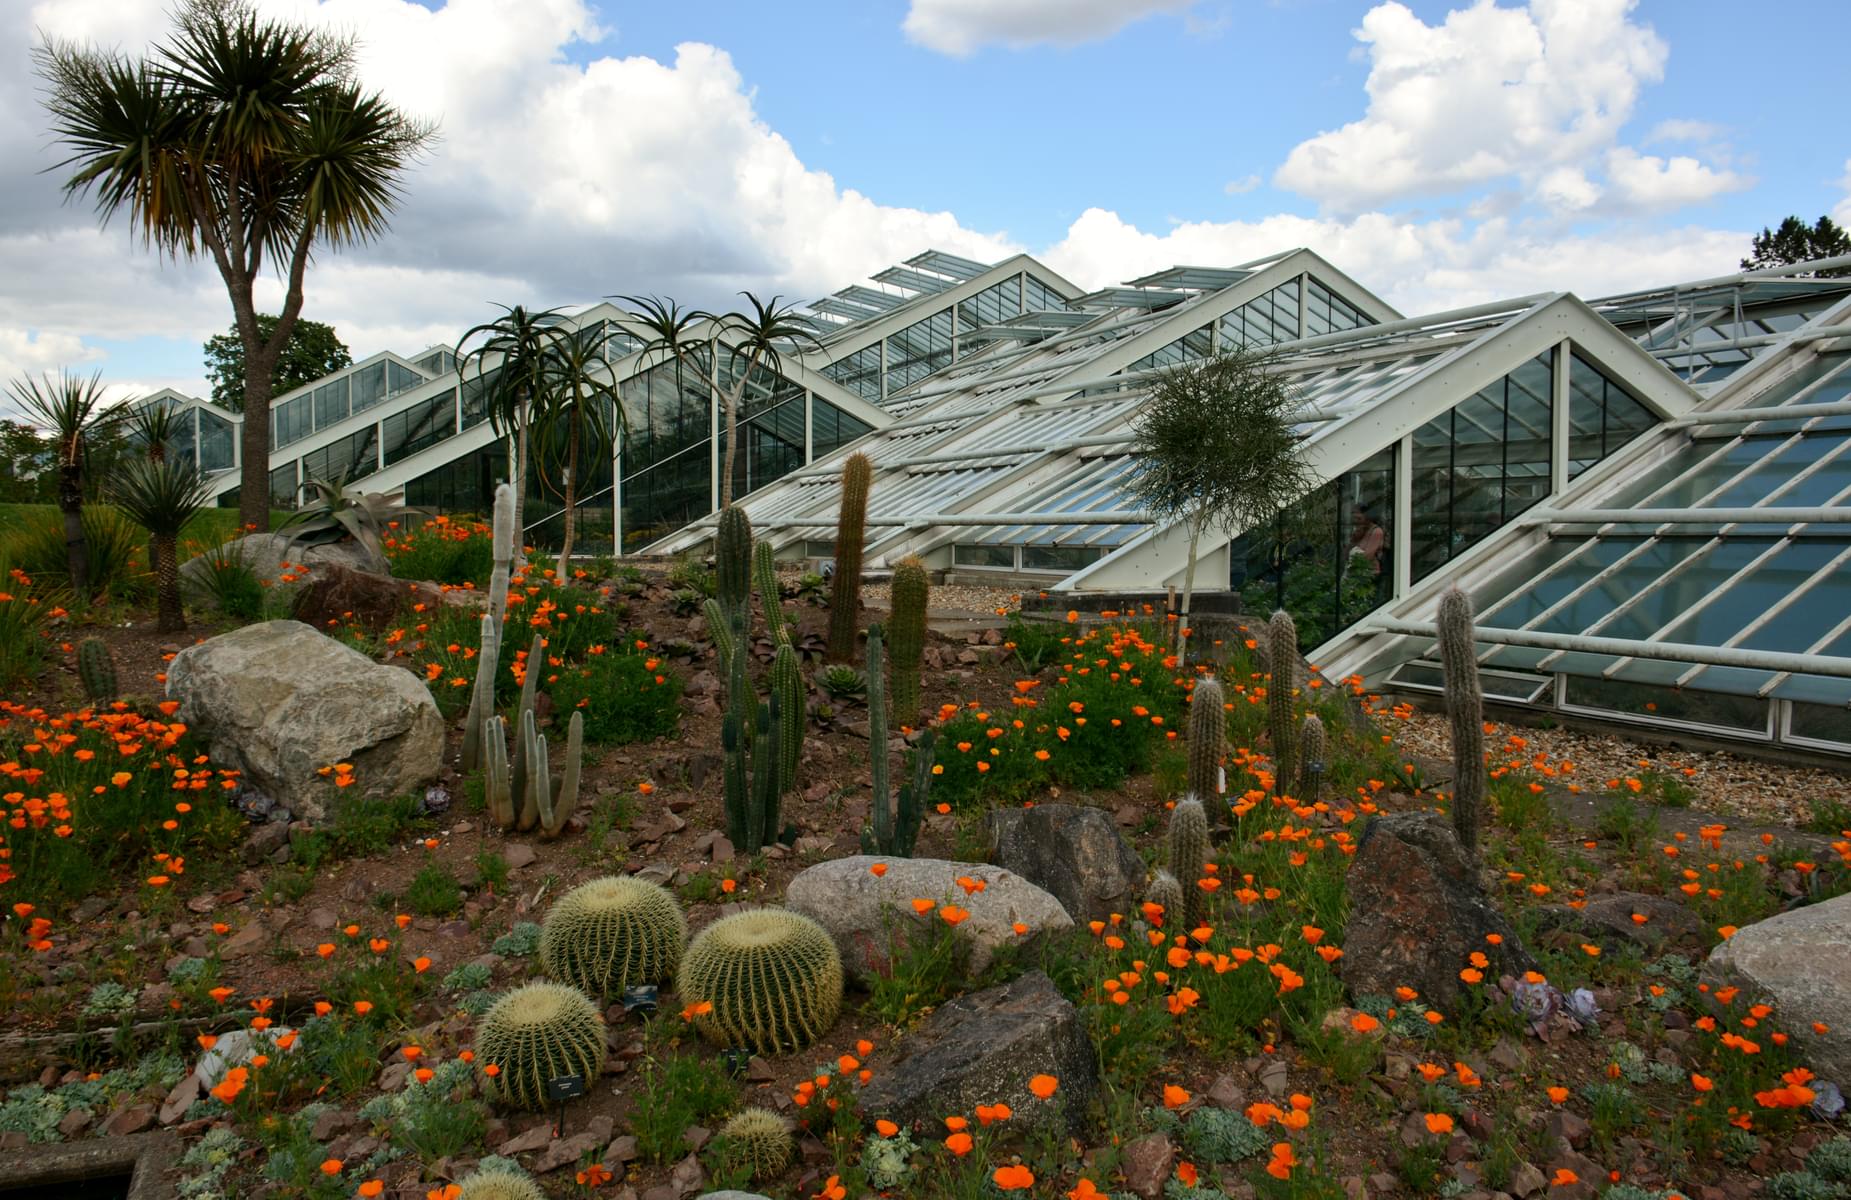 The Princess Of Wales Conservatory